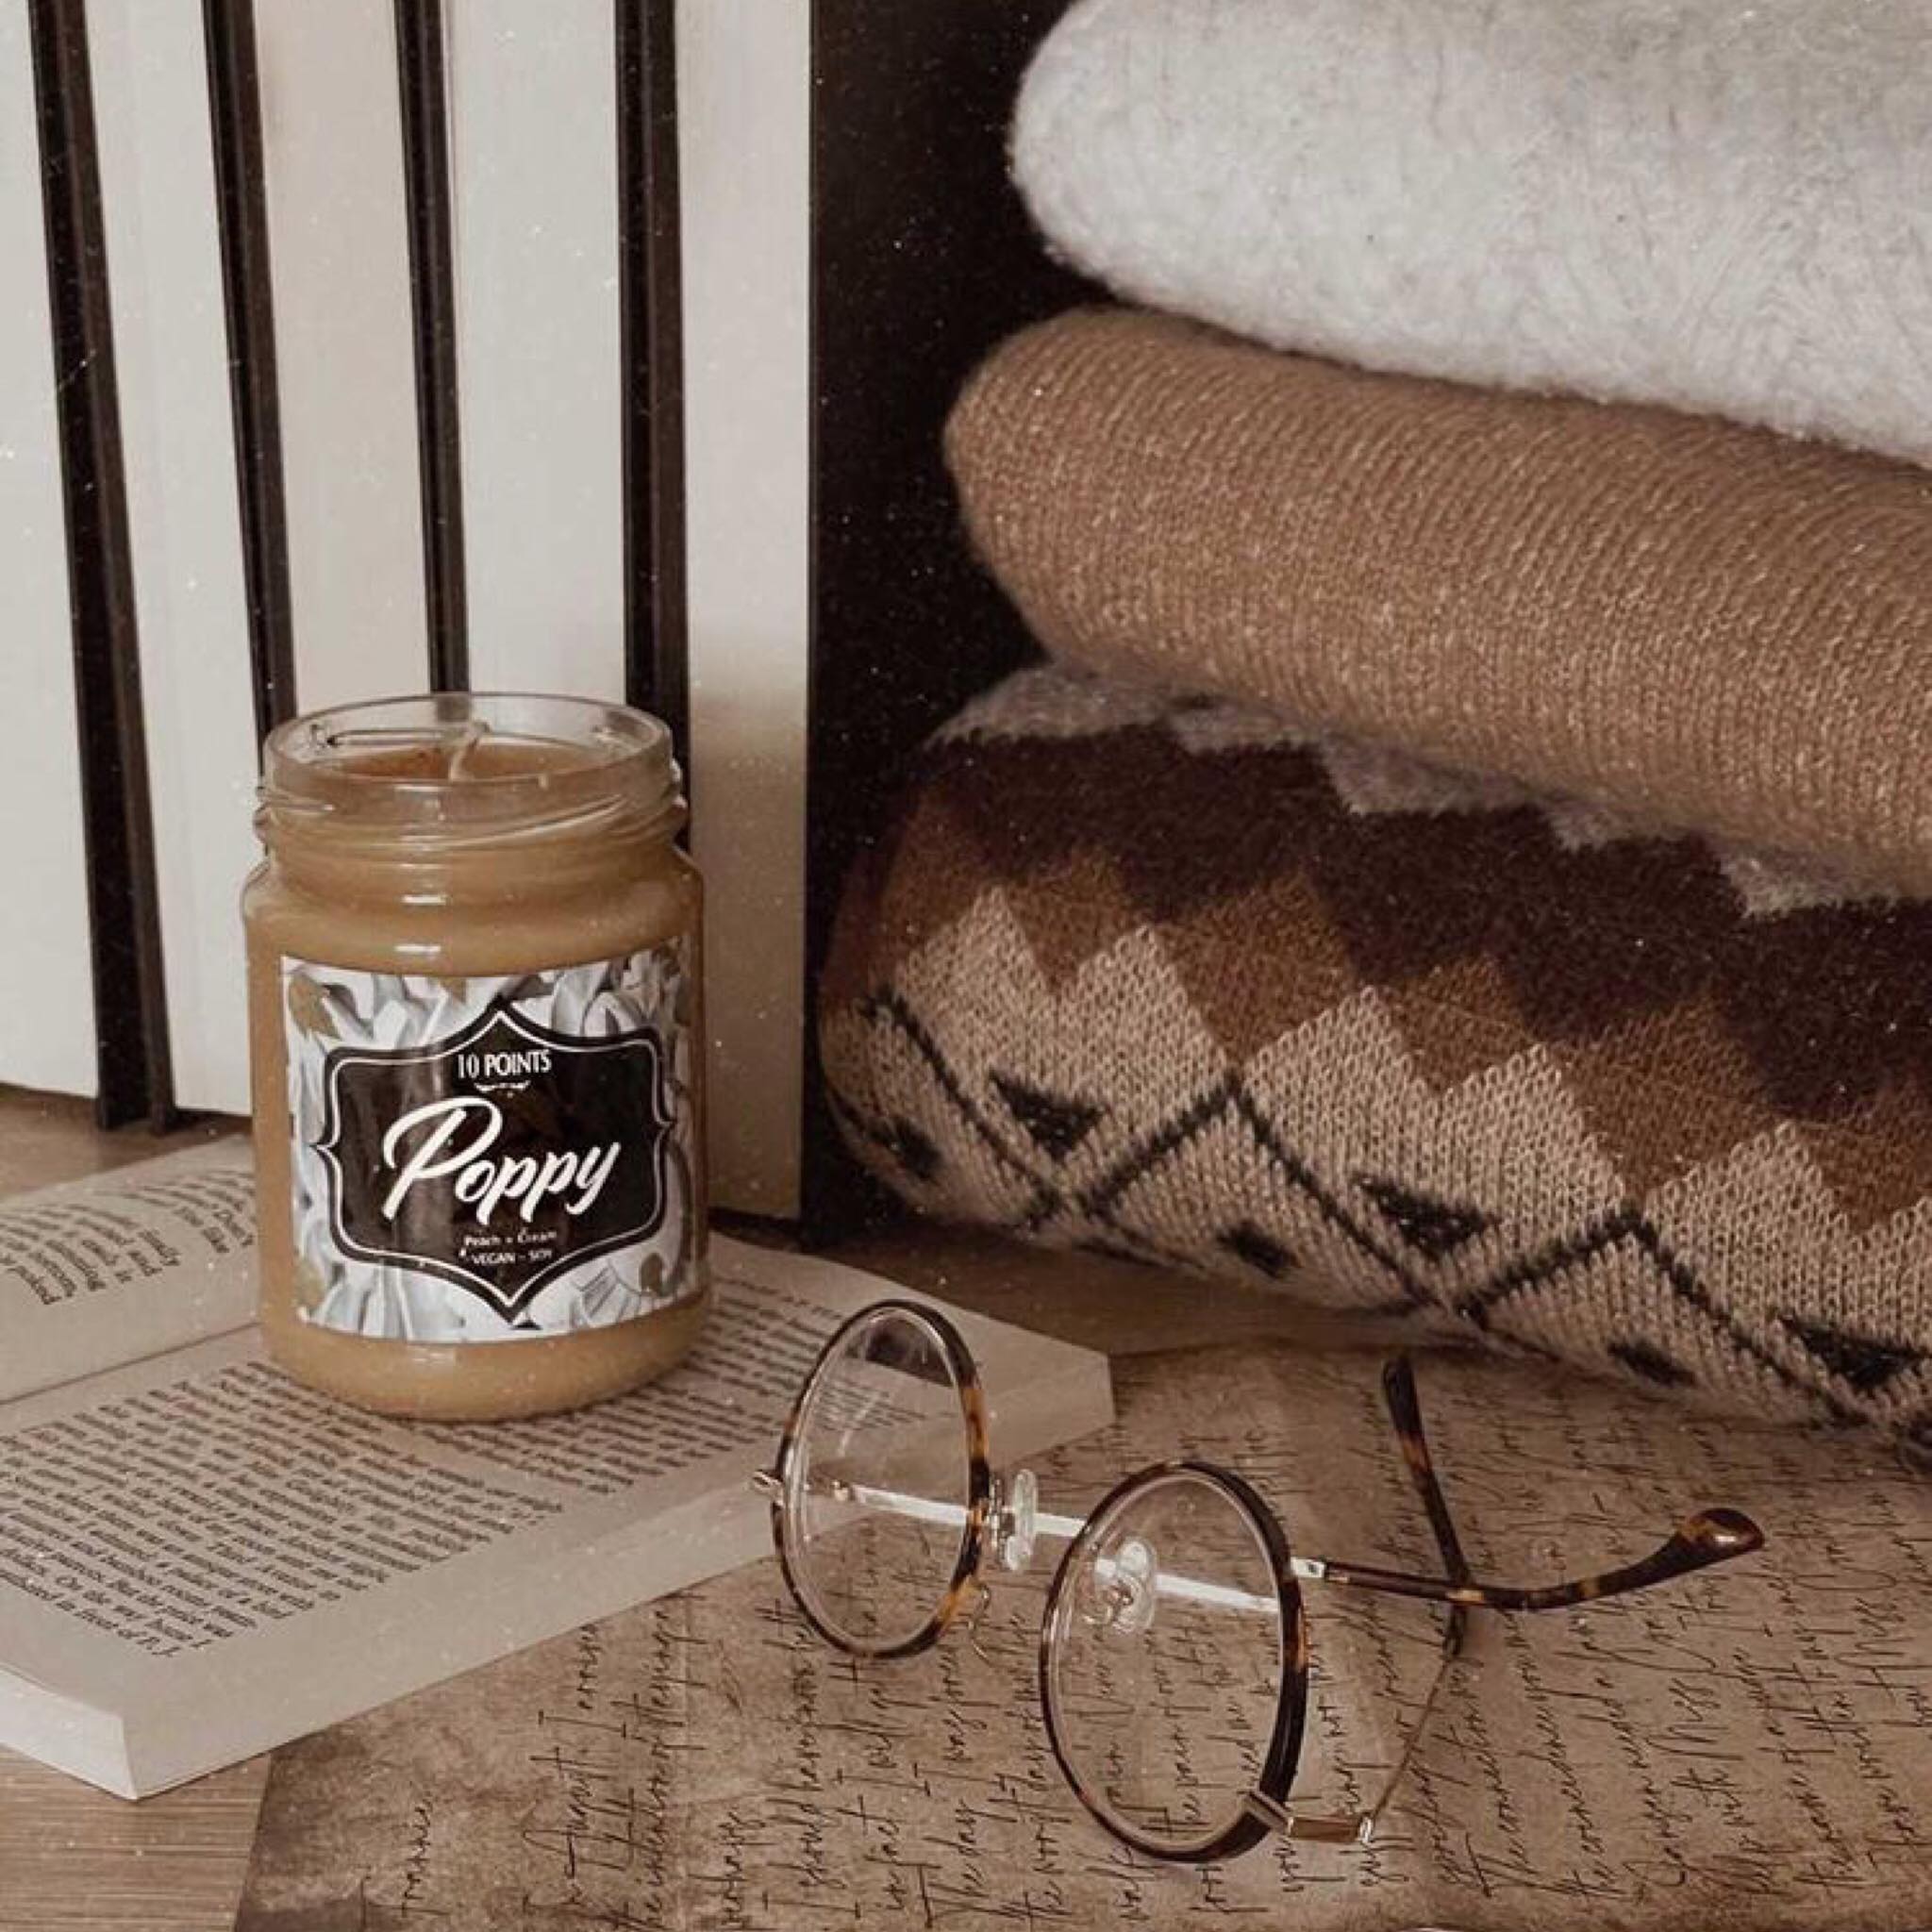 Poppy  - Soy Candle Scent Notes: Peach + Cream